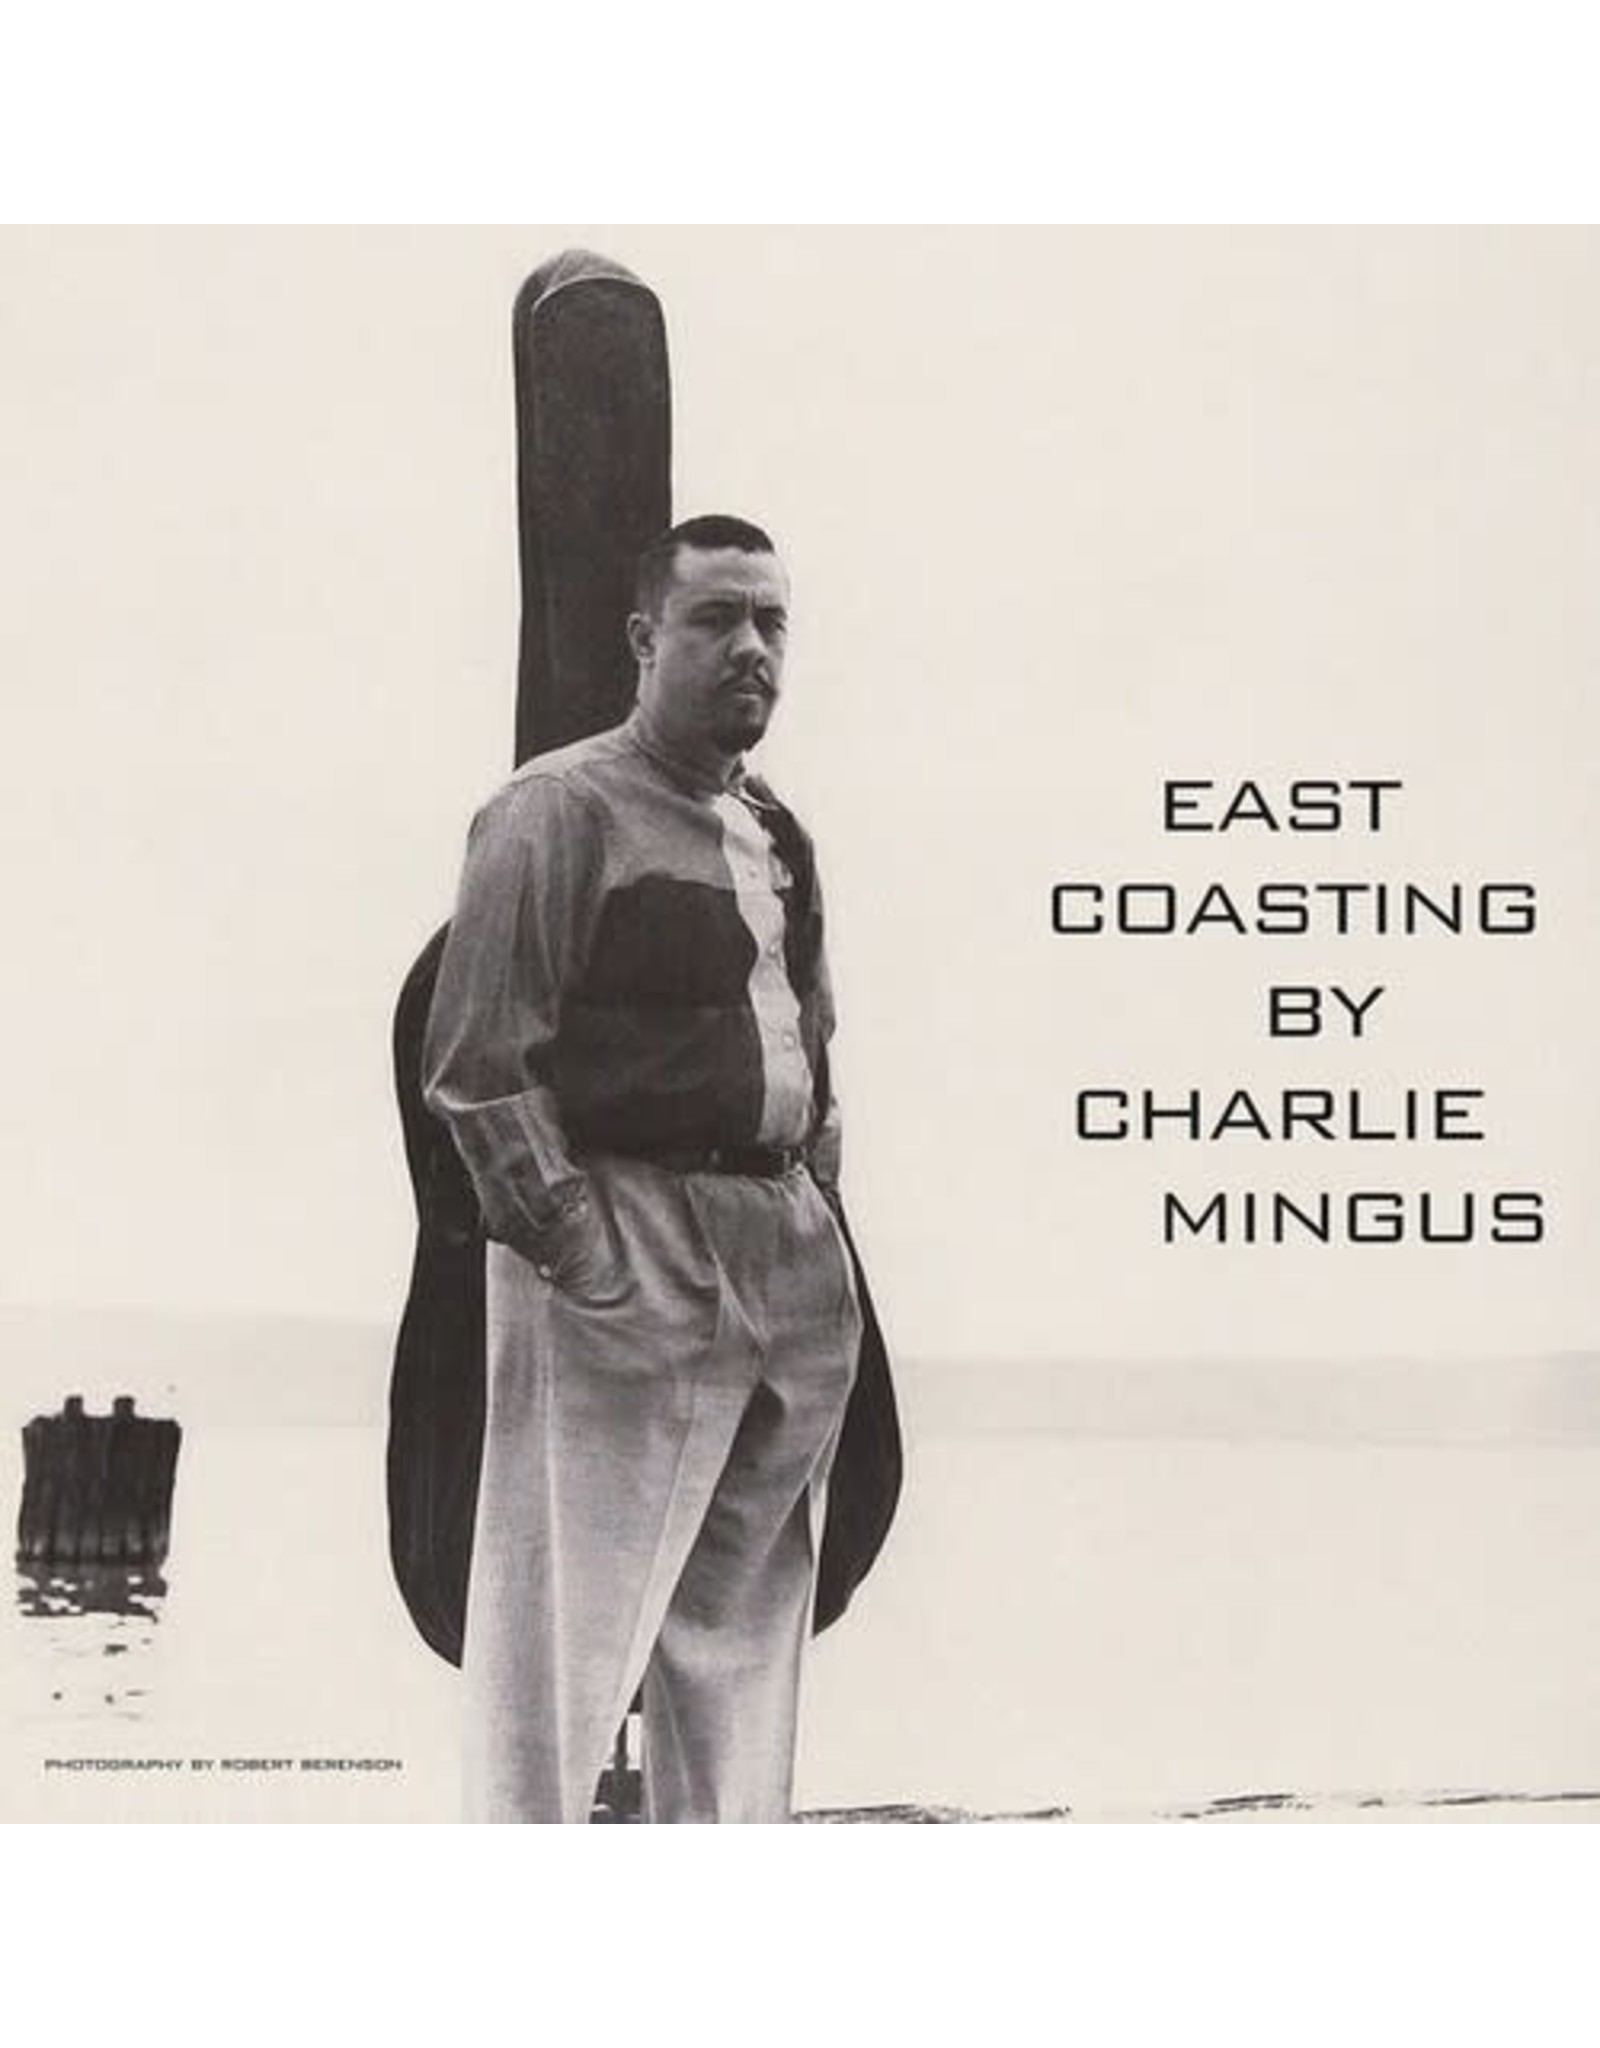 New Vinyl Charles Mingus - East Coasting (Limited Edition, Clear) LP